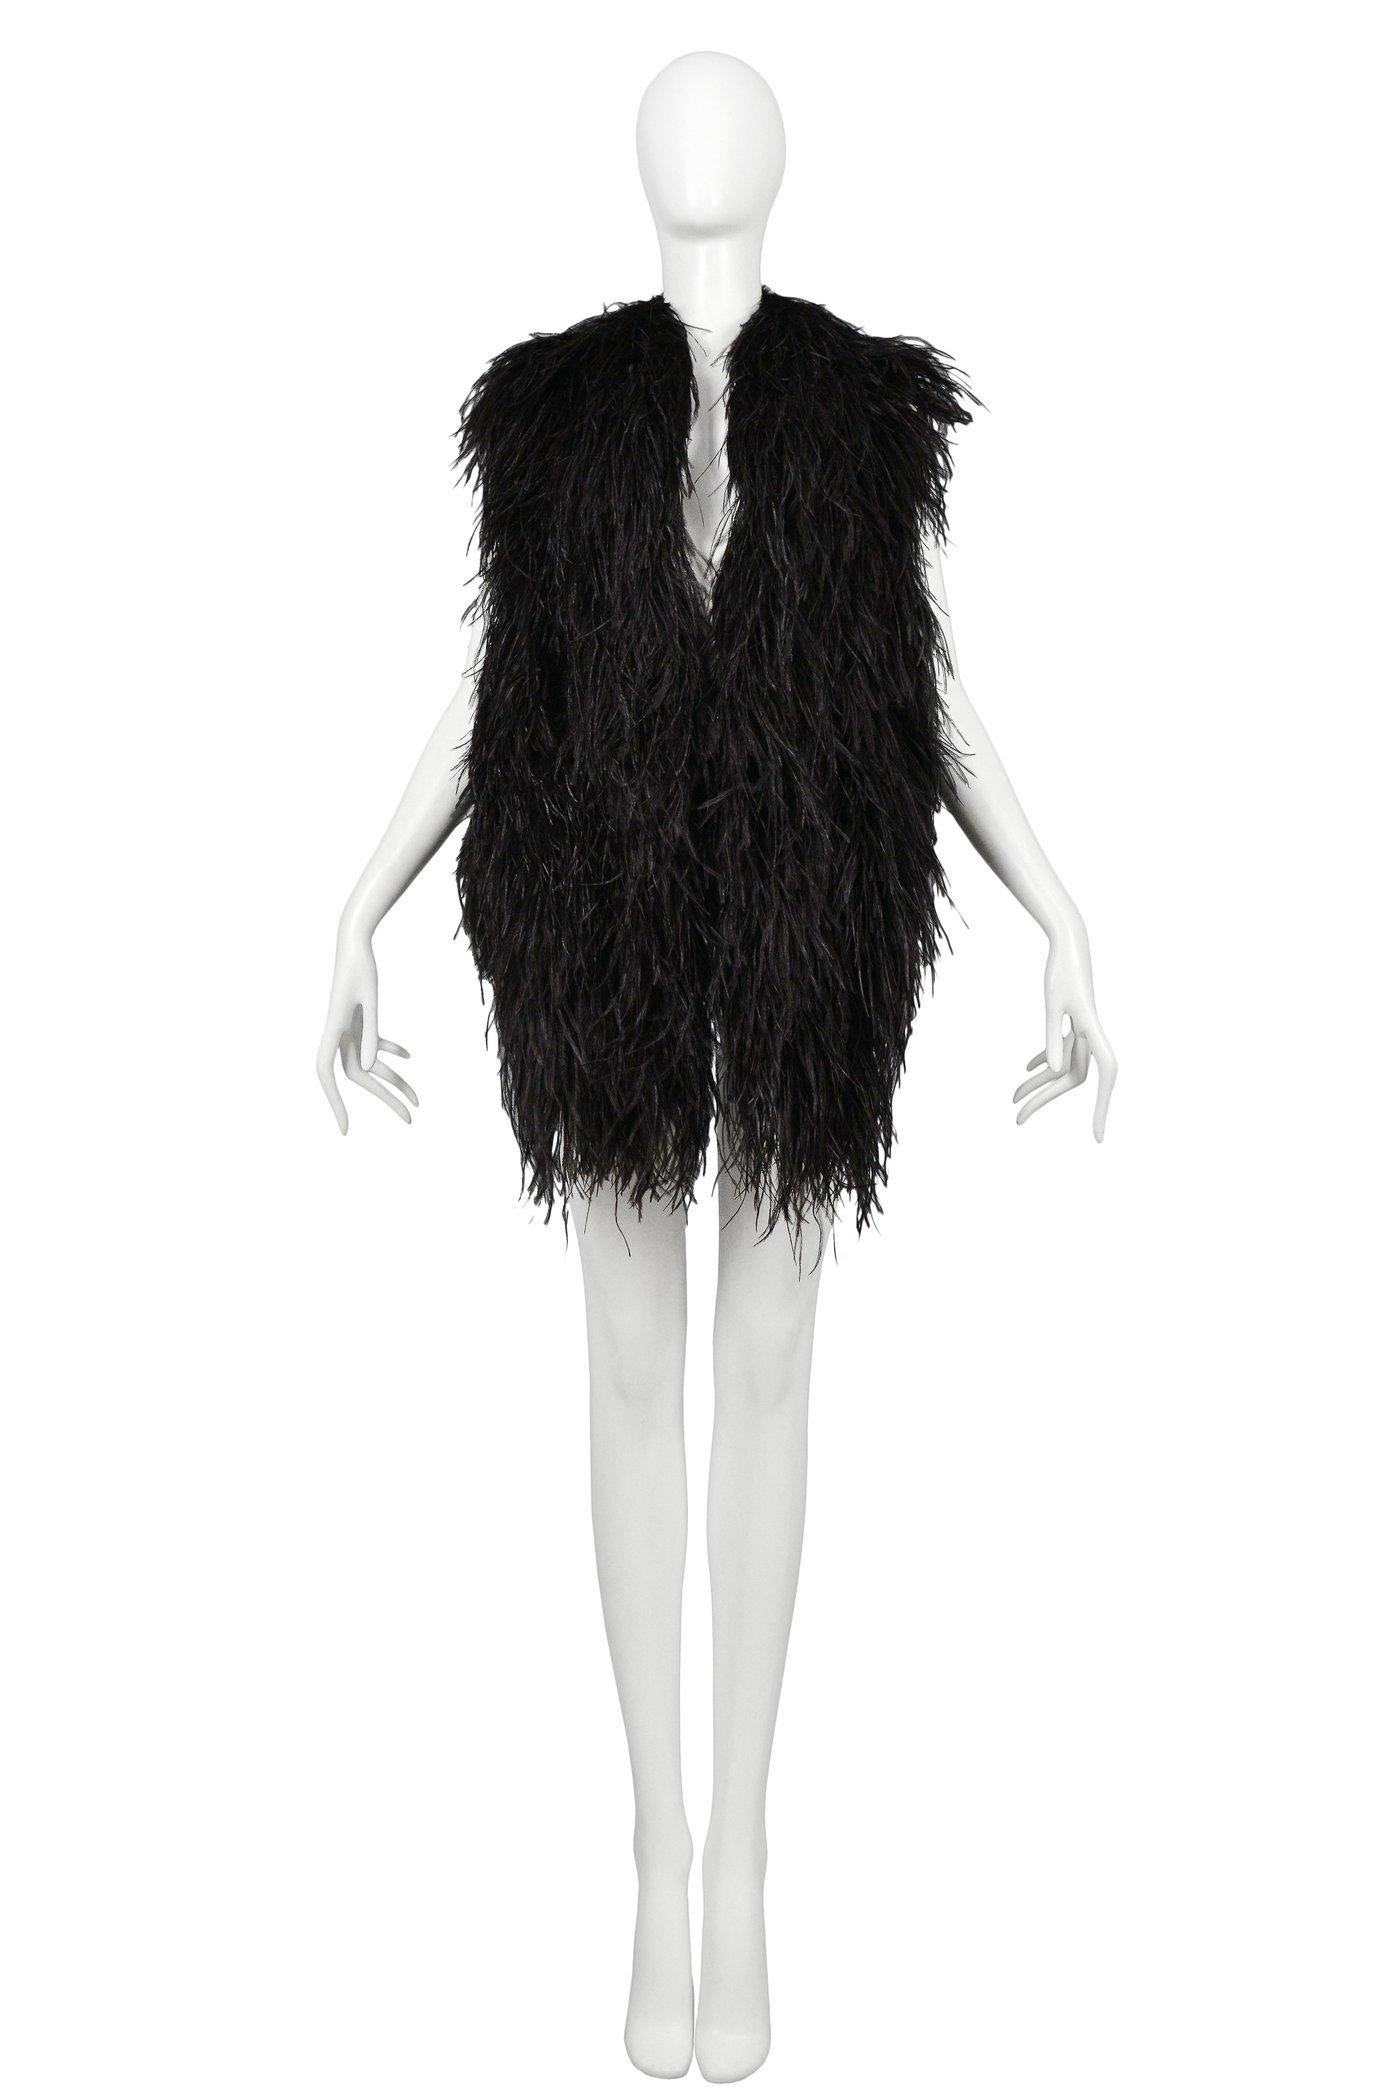 Resurrection Vintage is excited to offer a vintage Maison Martin Margiela black feather vest with a longer front, short back, large metallic label, and˙ bands at the back. Circa Autumn / Winter 1997-98

Maison Martin Margiela
Size: One